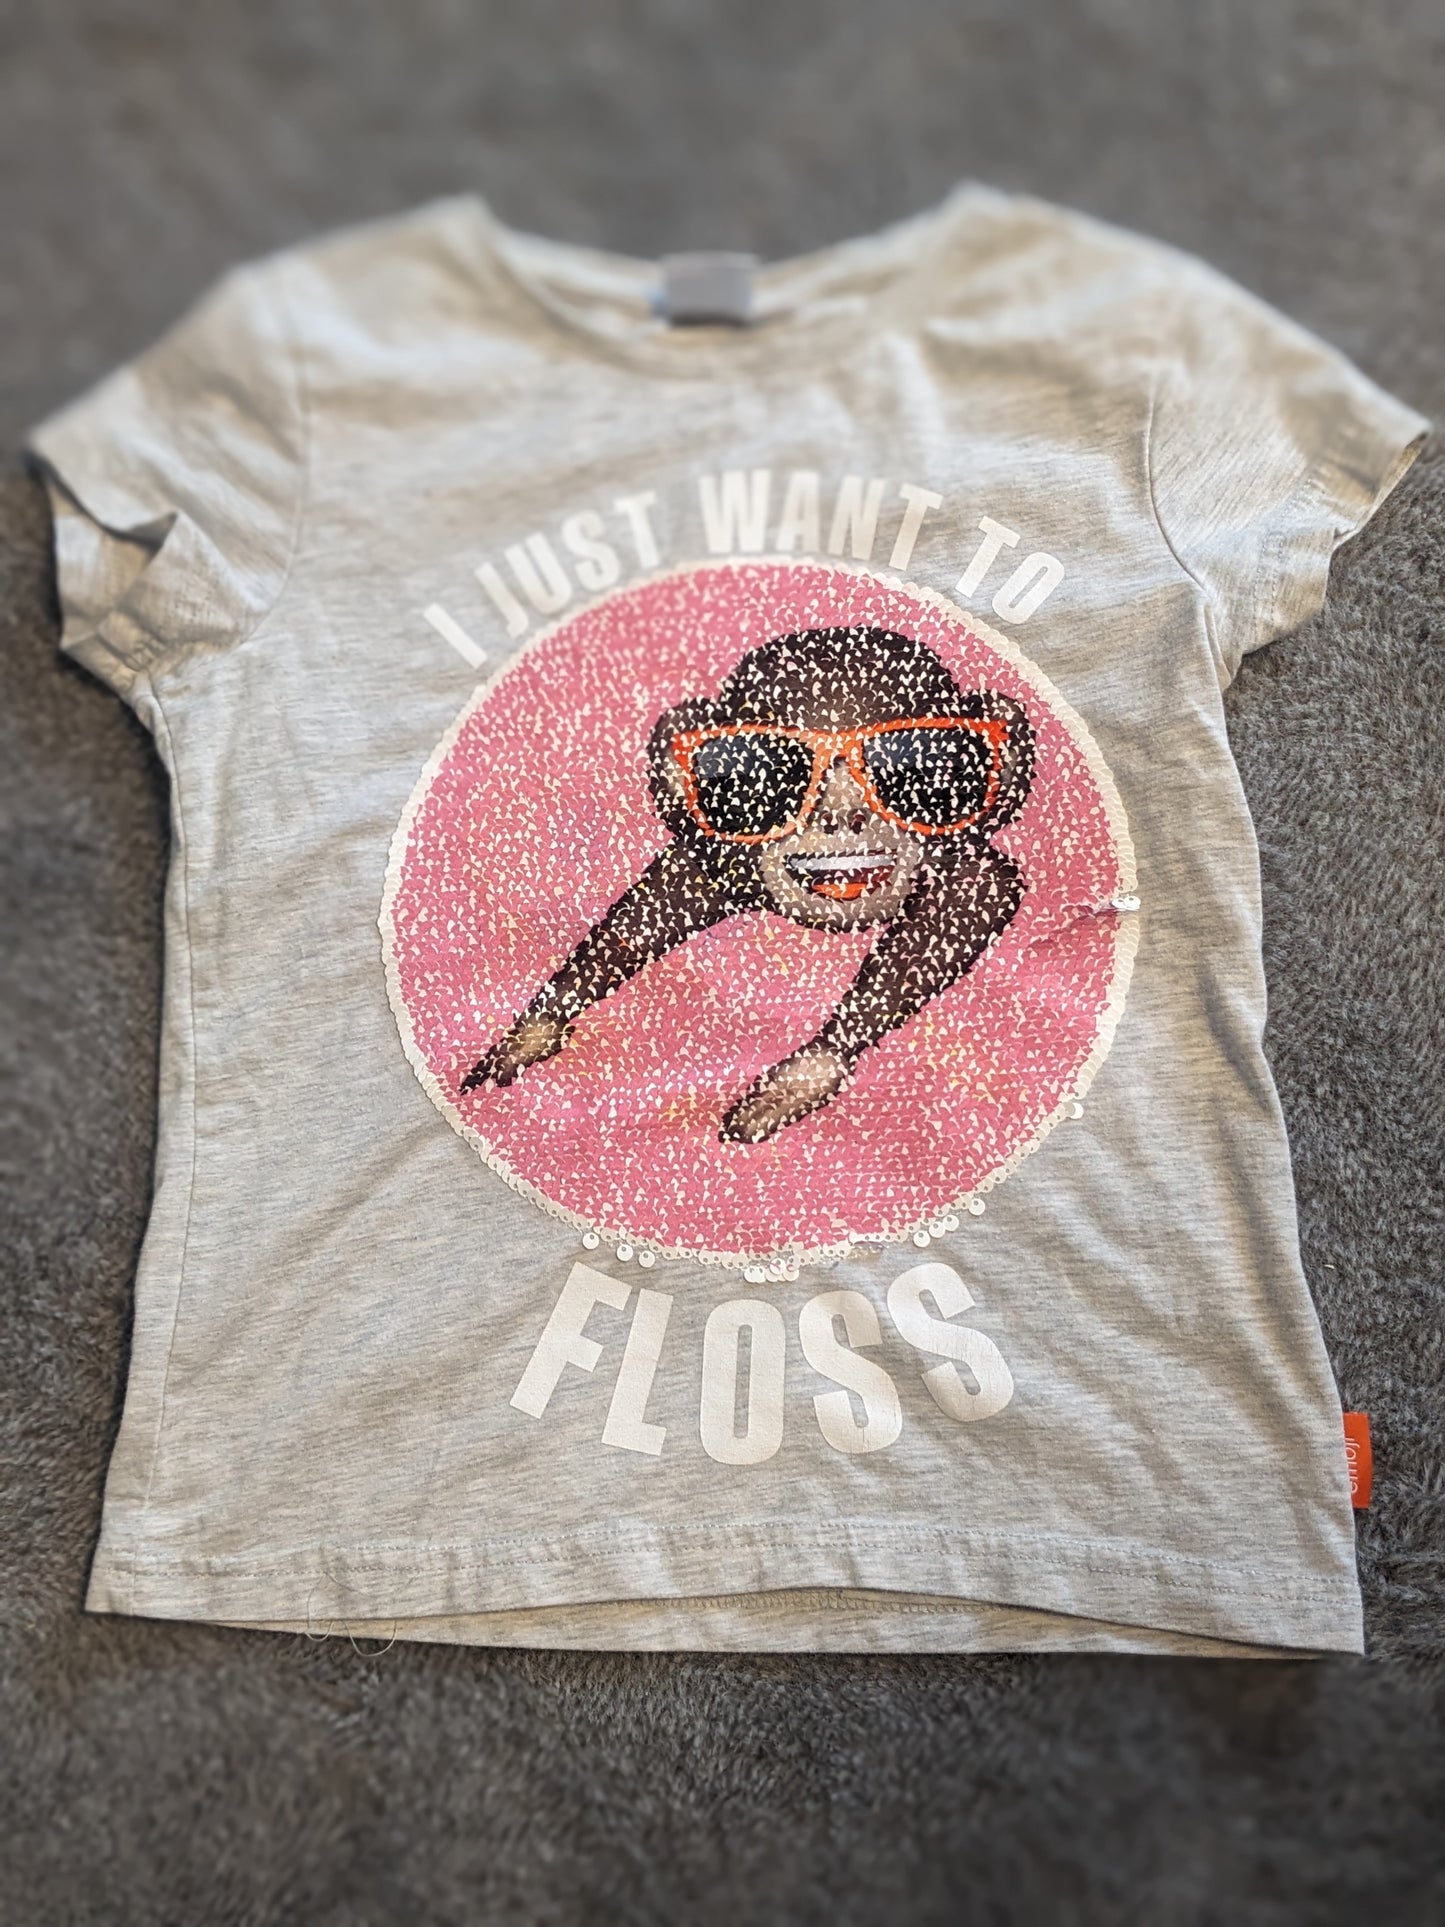 I Just Want to Floss shirt size 10